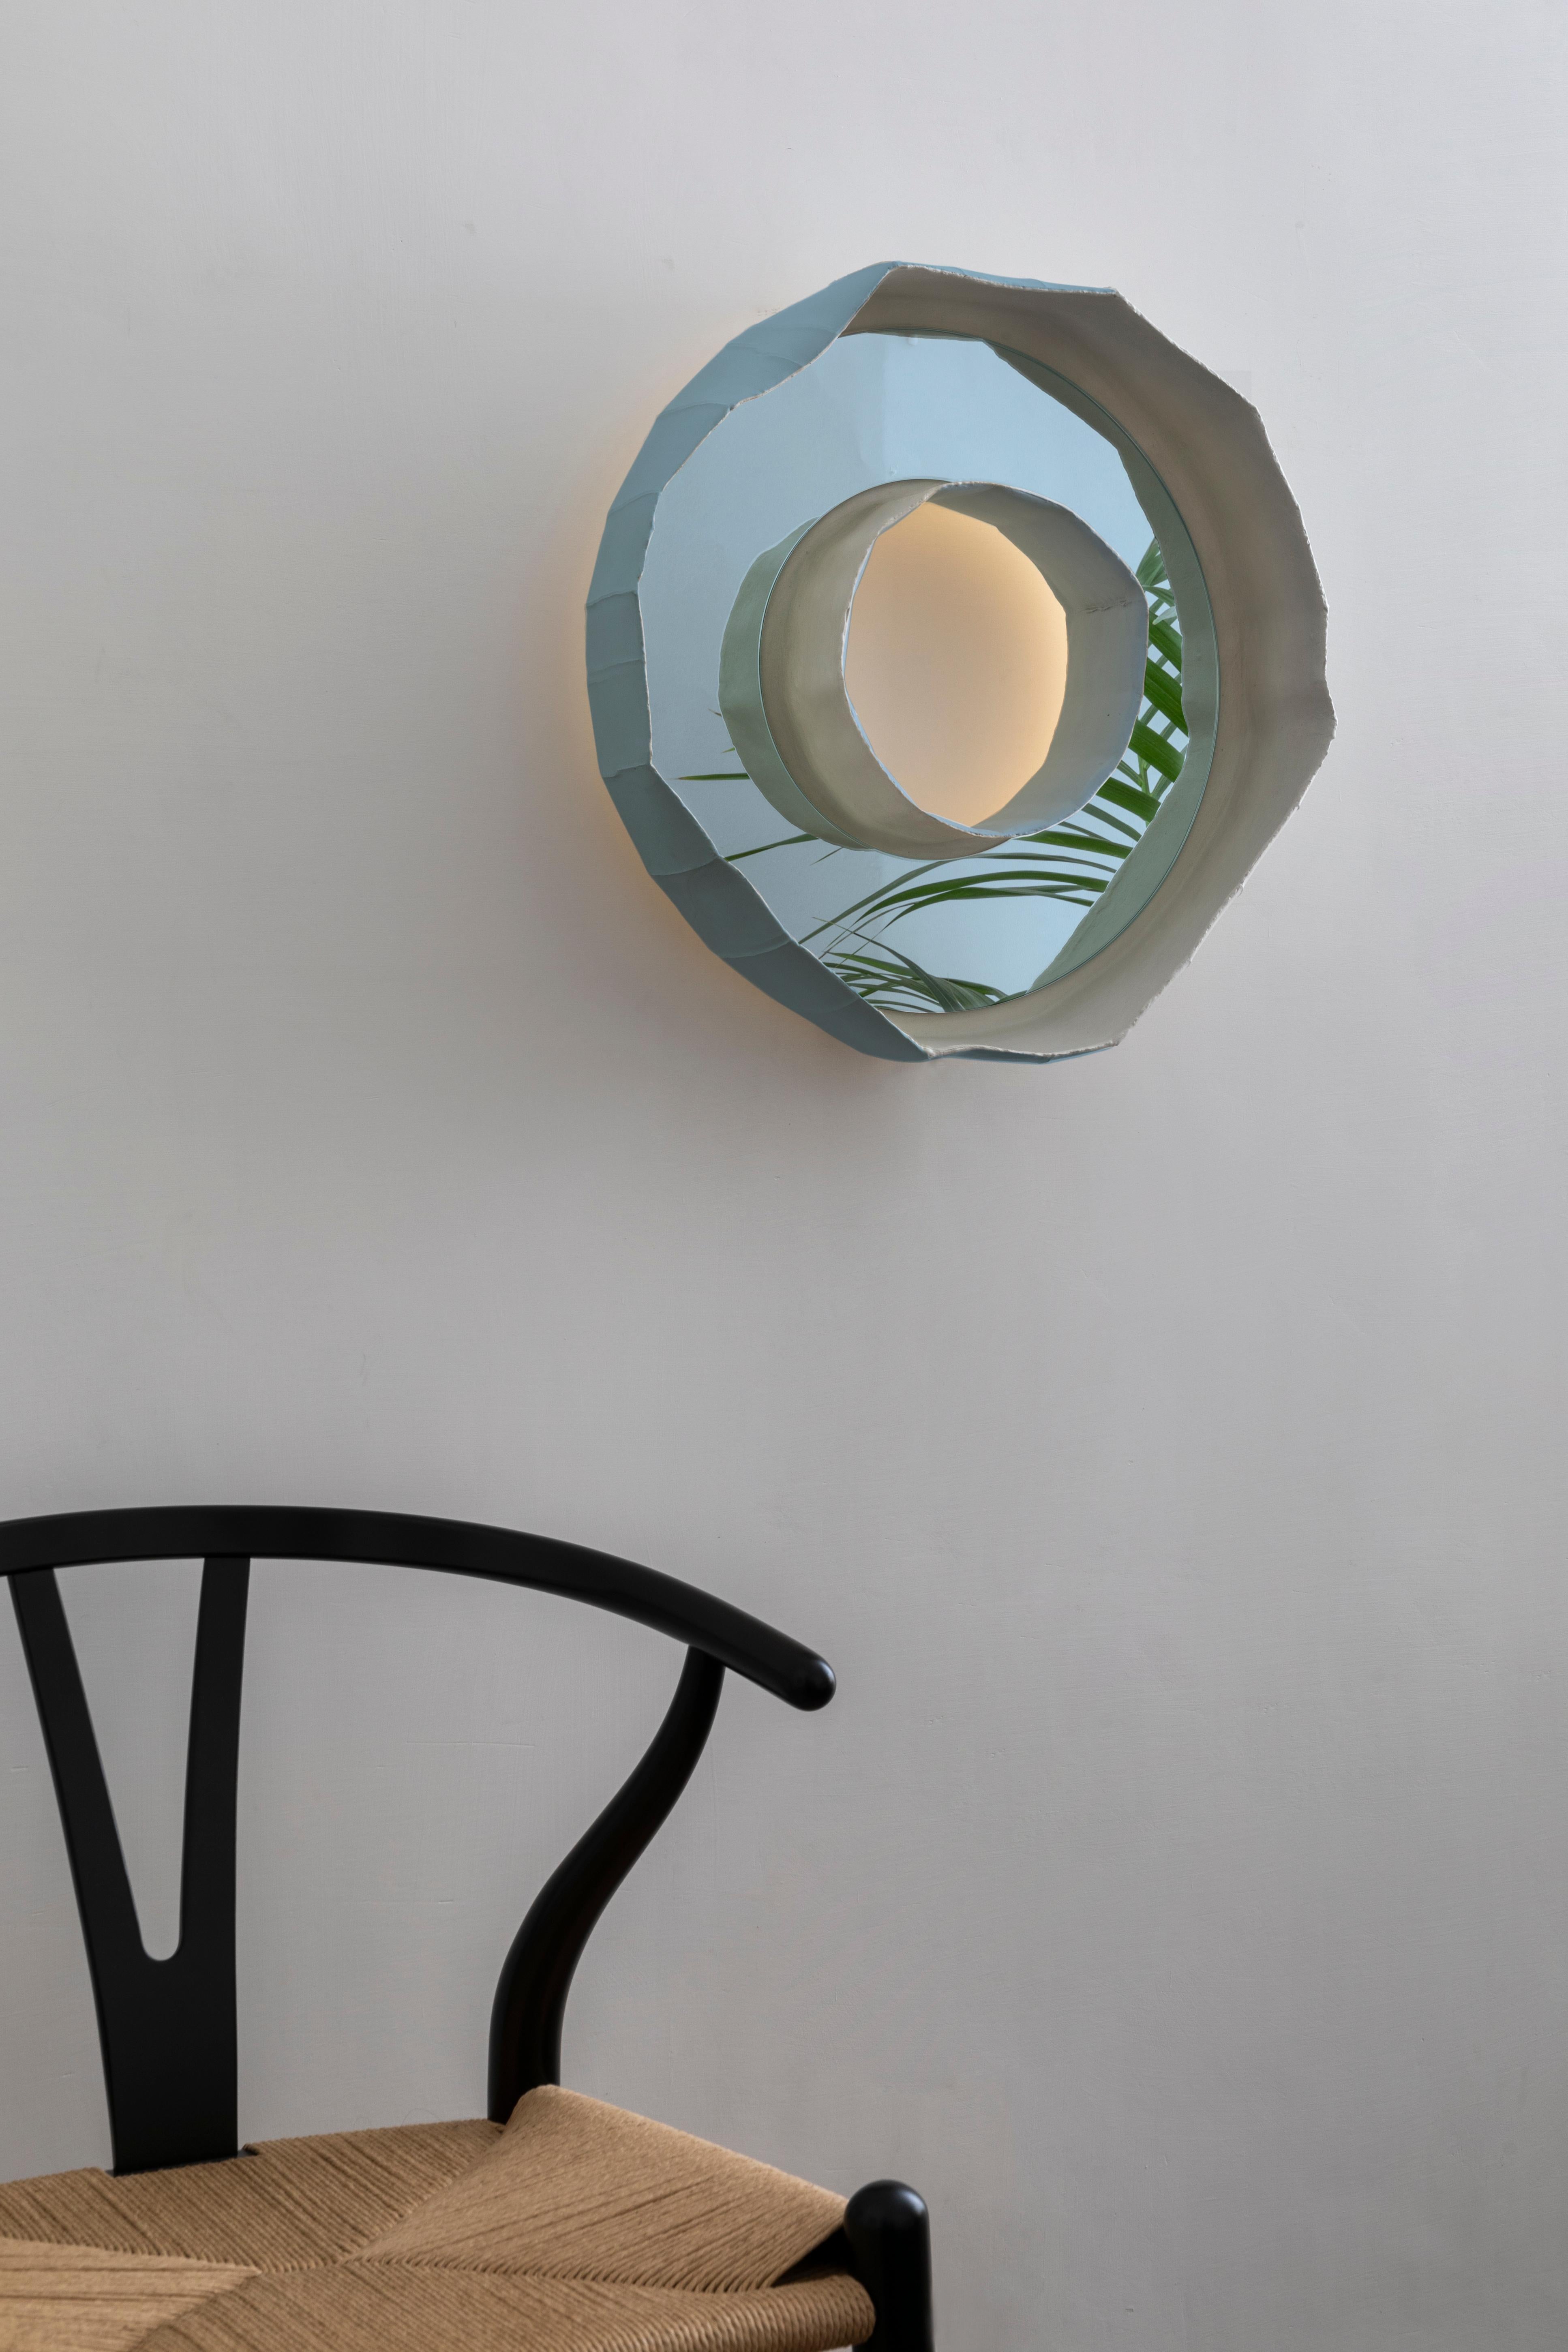 Ring Aura, stunning mirror-lamp handmade in Italy, one of 2 designs that make up the collection Reflections, the result of a collaboration between artist Paola Paronetto & designer Giovanni Botticelli, that integrates ceramic with colour, glass and